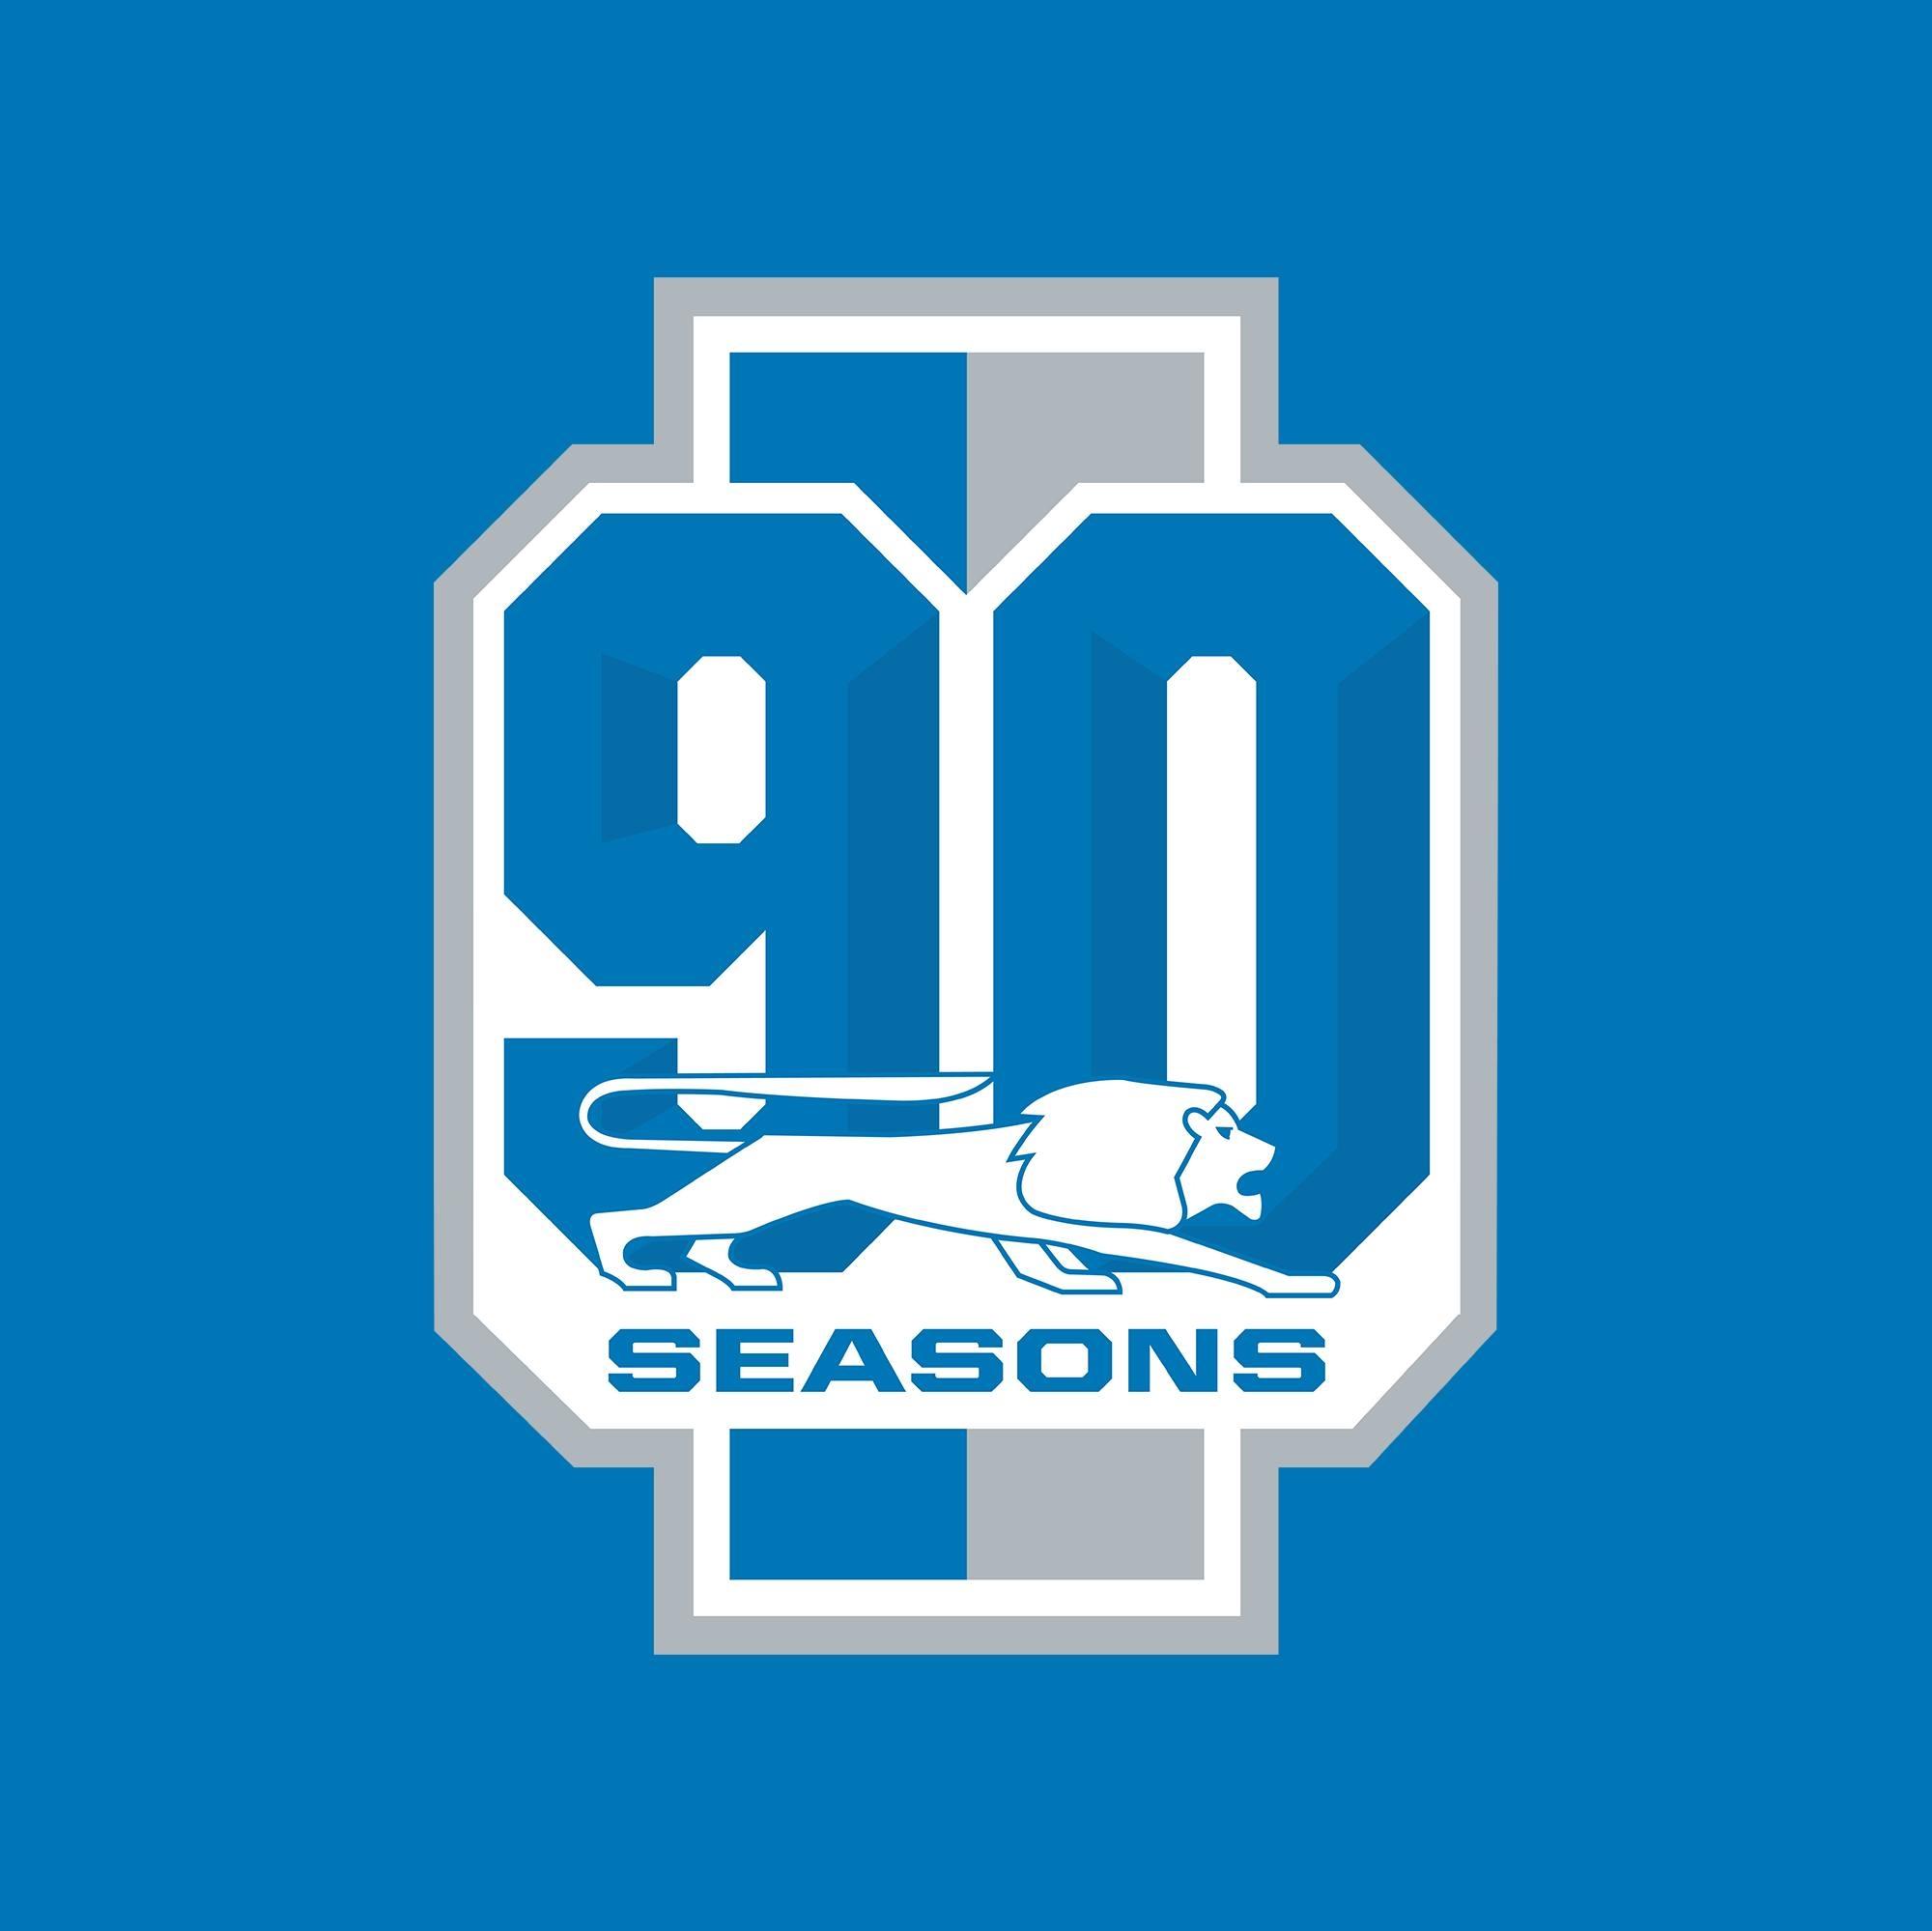 Detroit Lions Updated Their Profile Picture